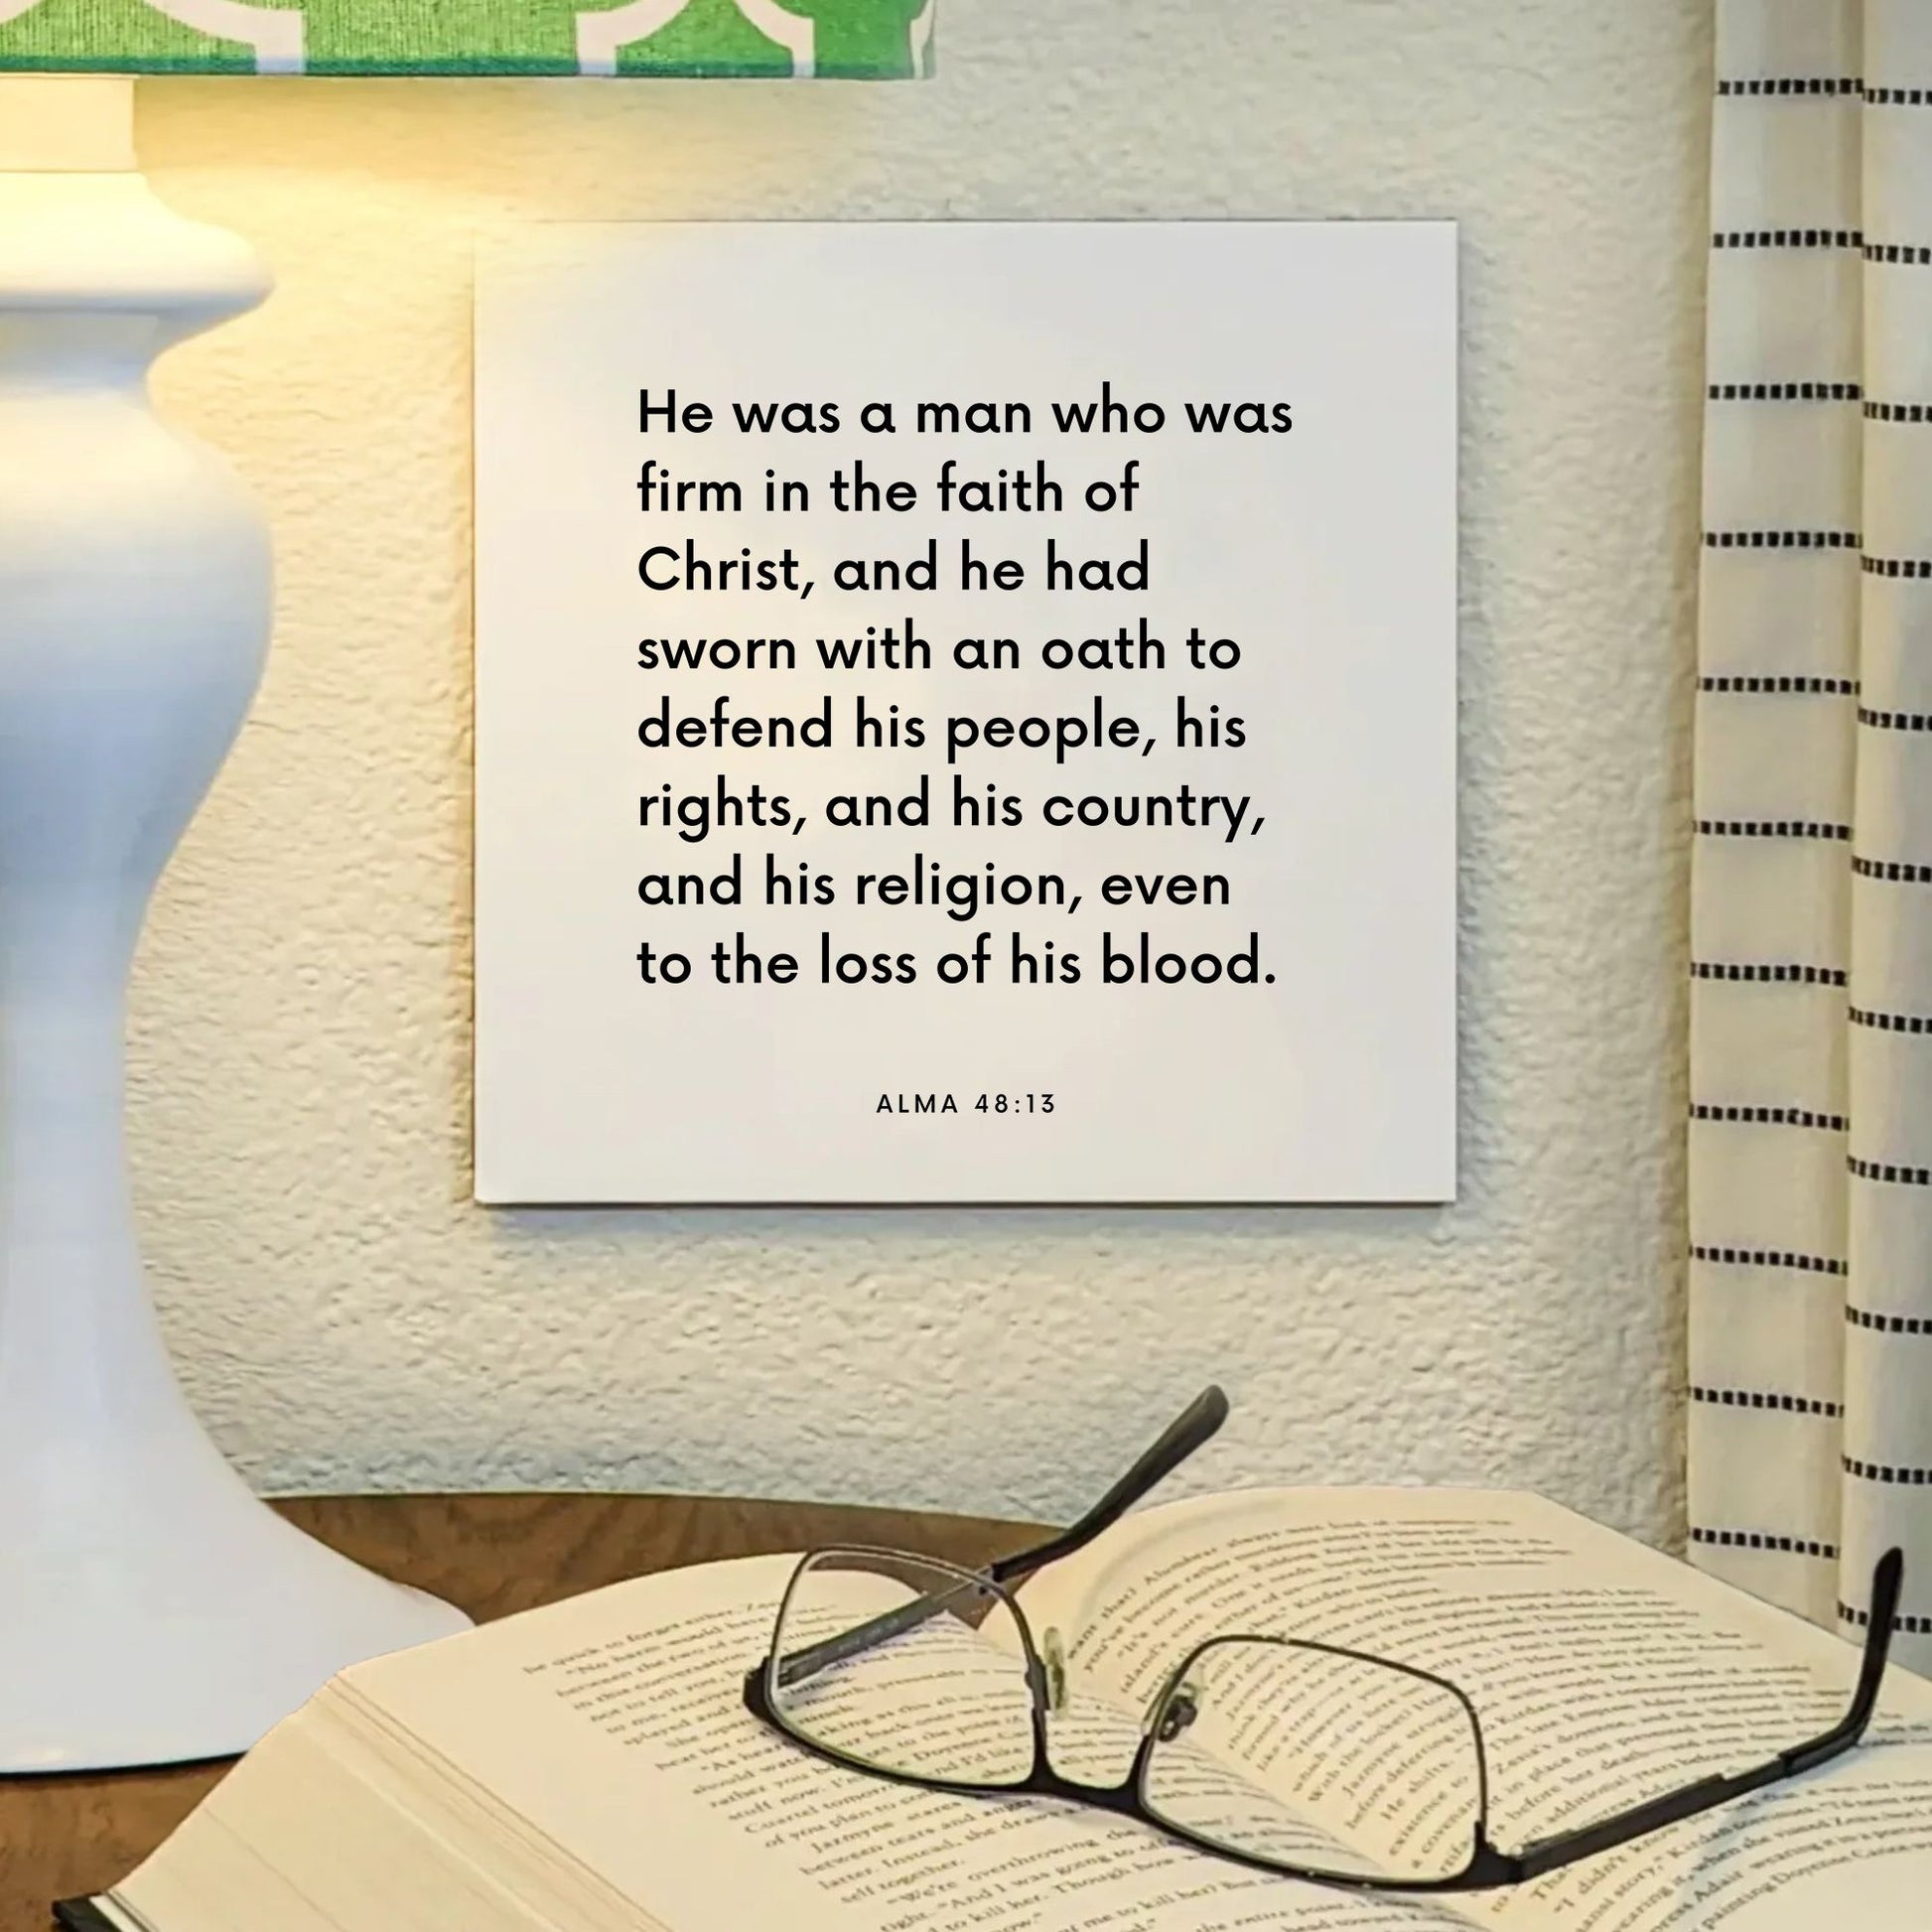 Lamp mouting of the scripture tile for Alma 48:13 - "He was a man who was firm in the faith of Christ"